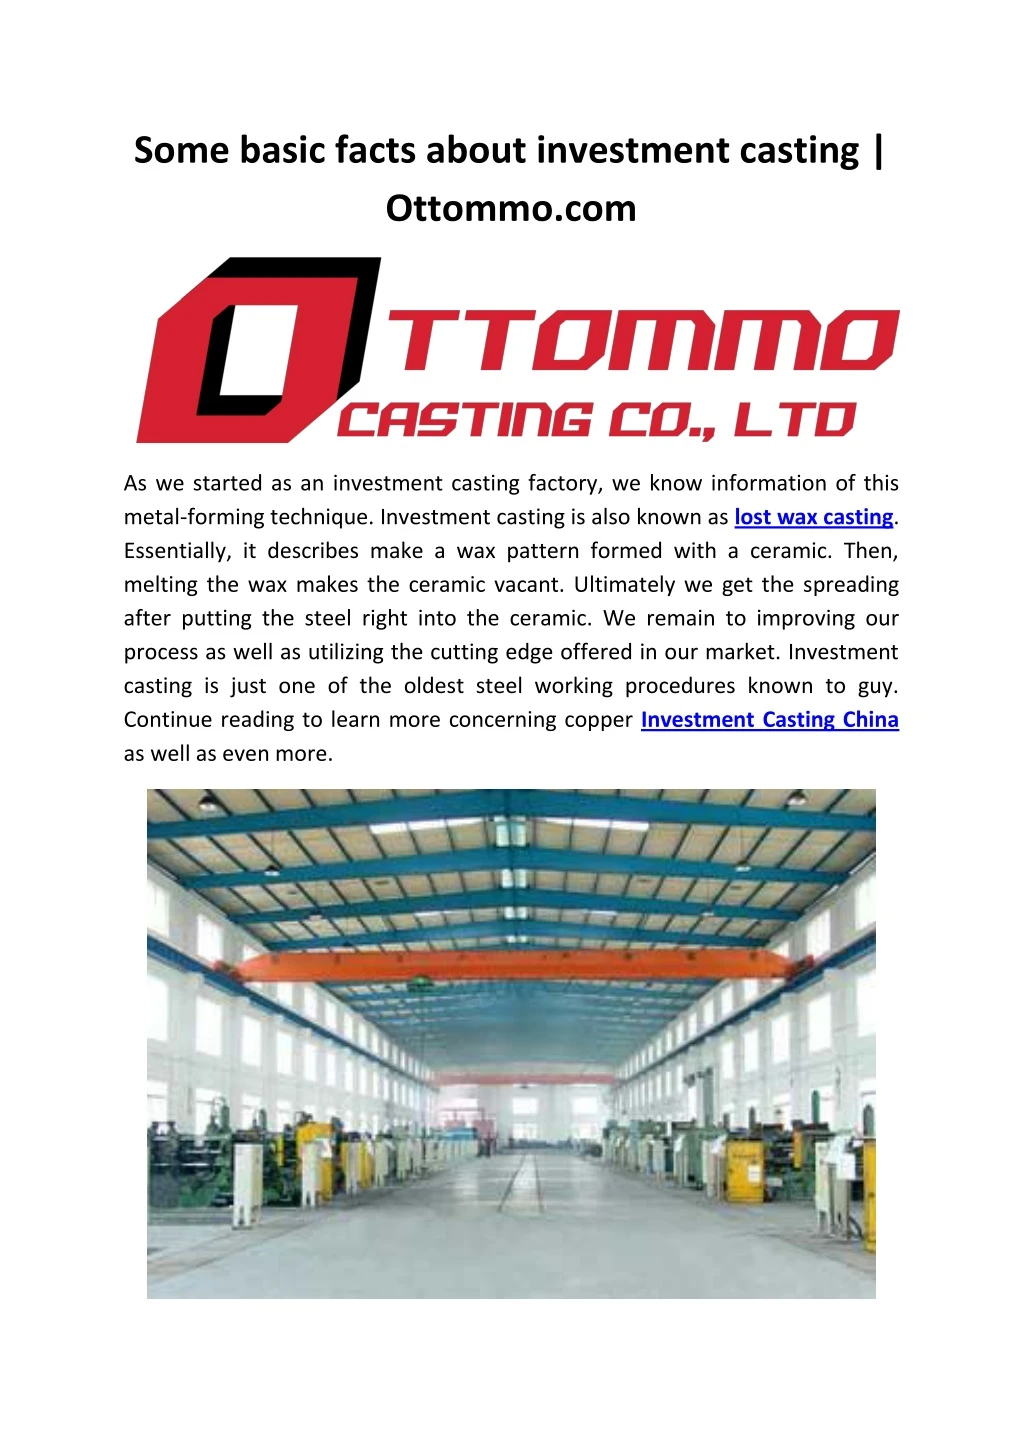 some basic facts about investment casting ottommo